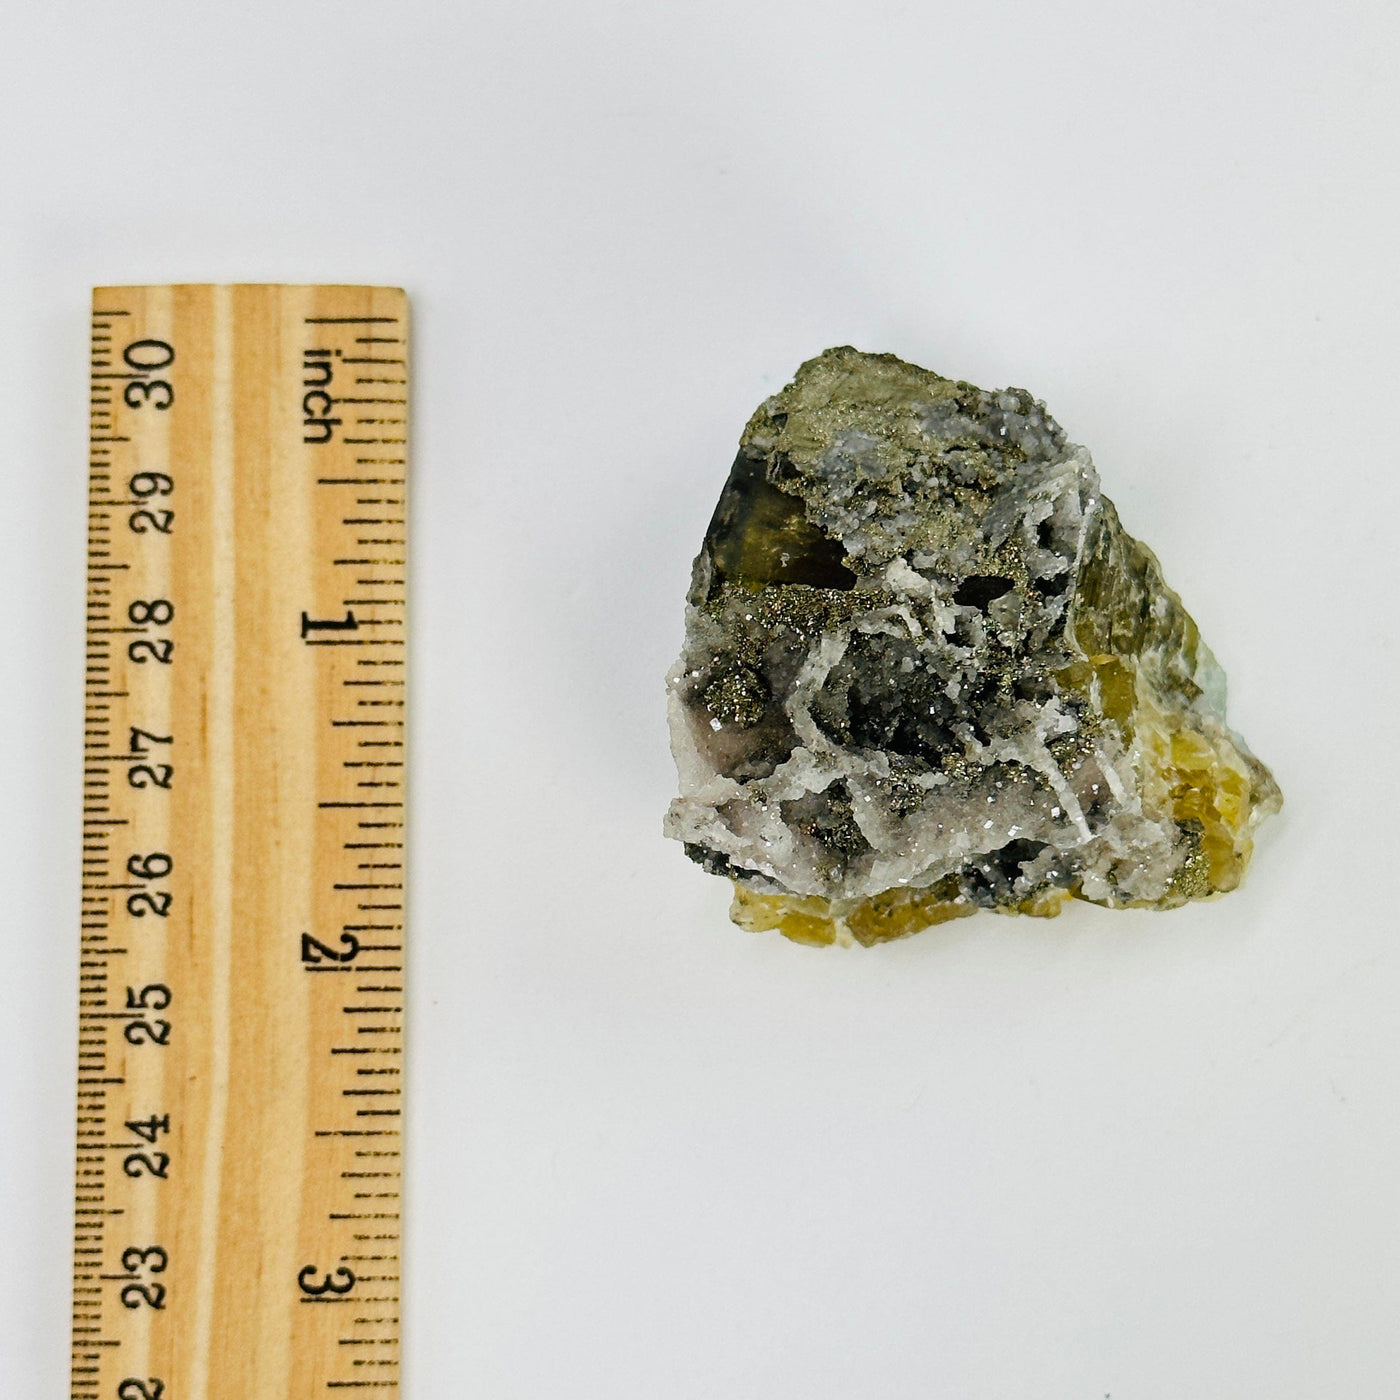 epidote with pyrite growth next to a ruler for size reference